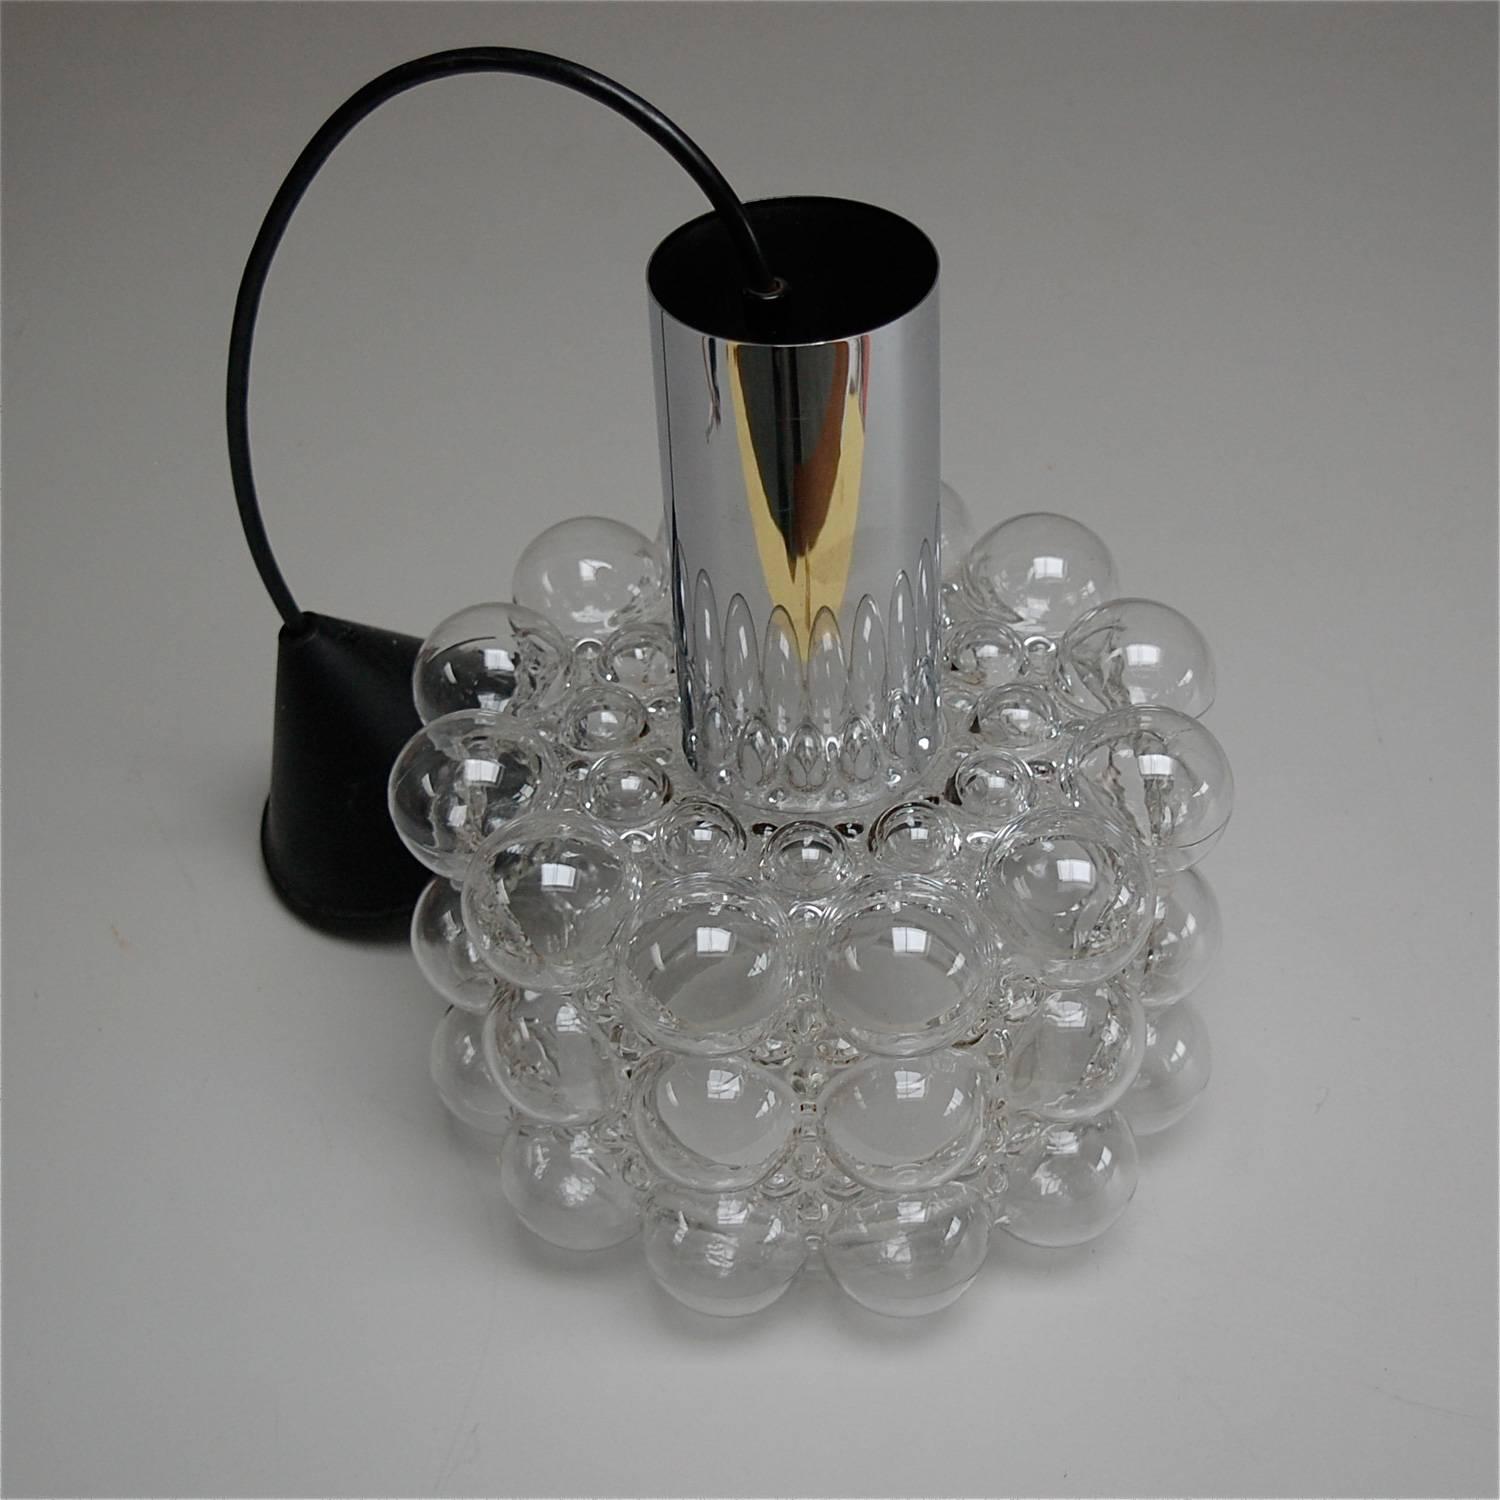 German Silver Colored Bubble Pendant Light by Helena Tynell, circa 1970s